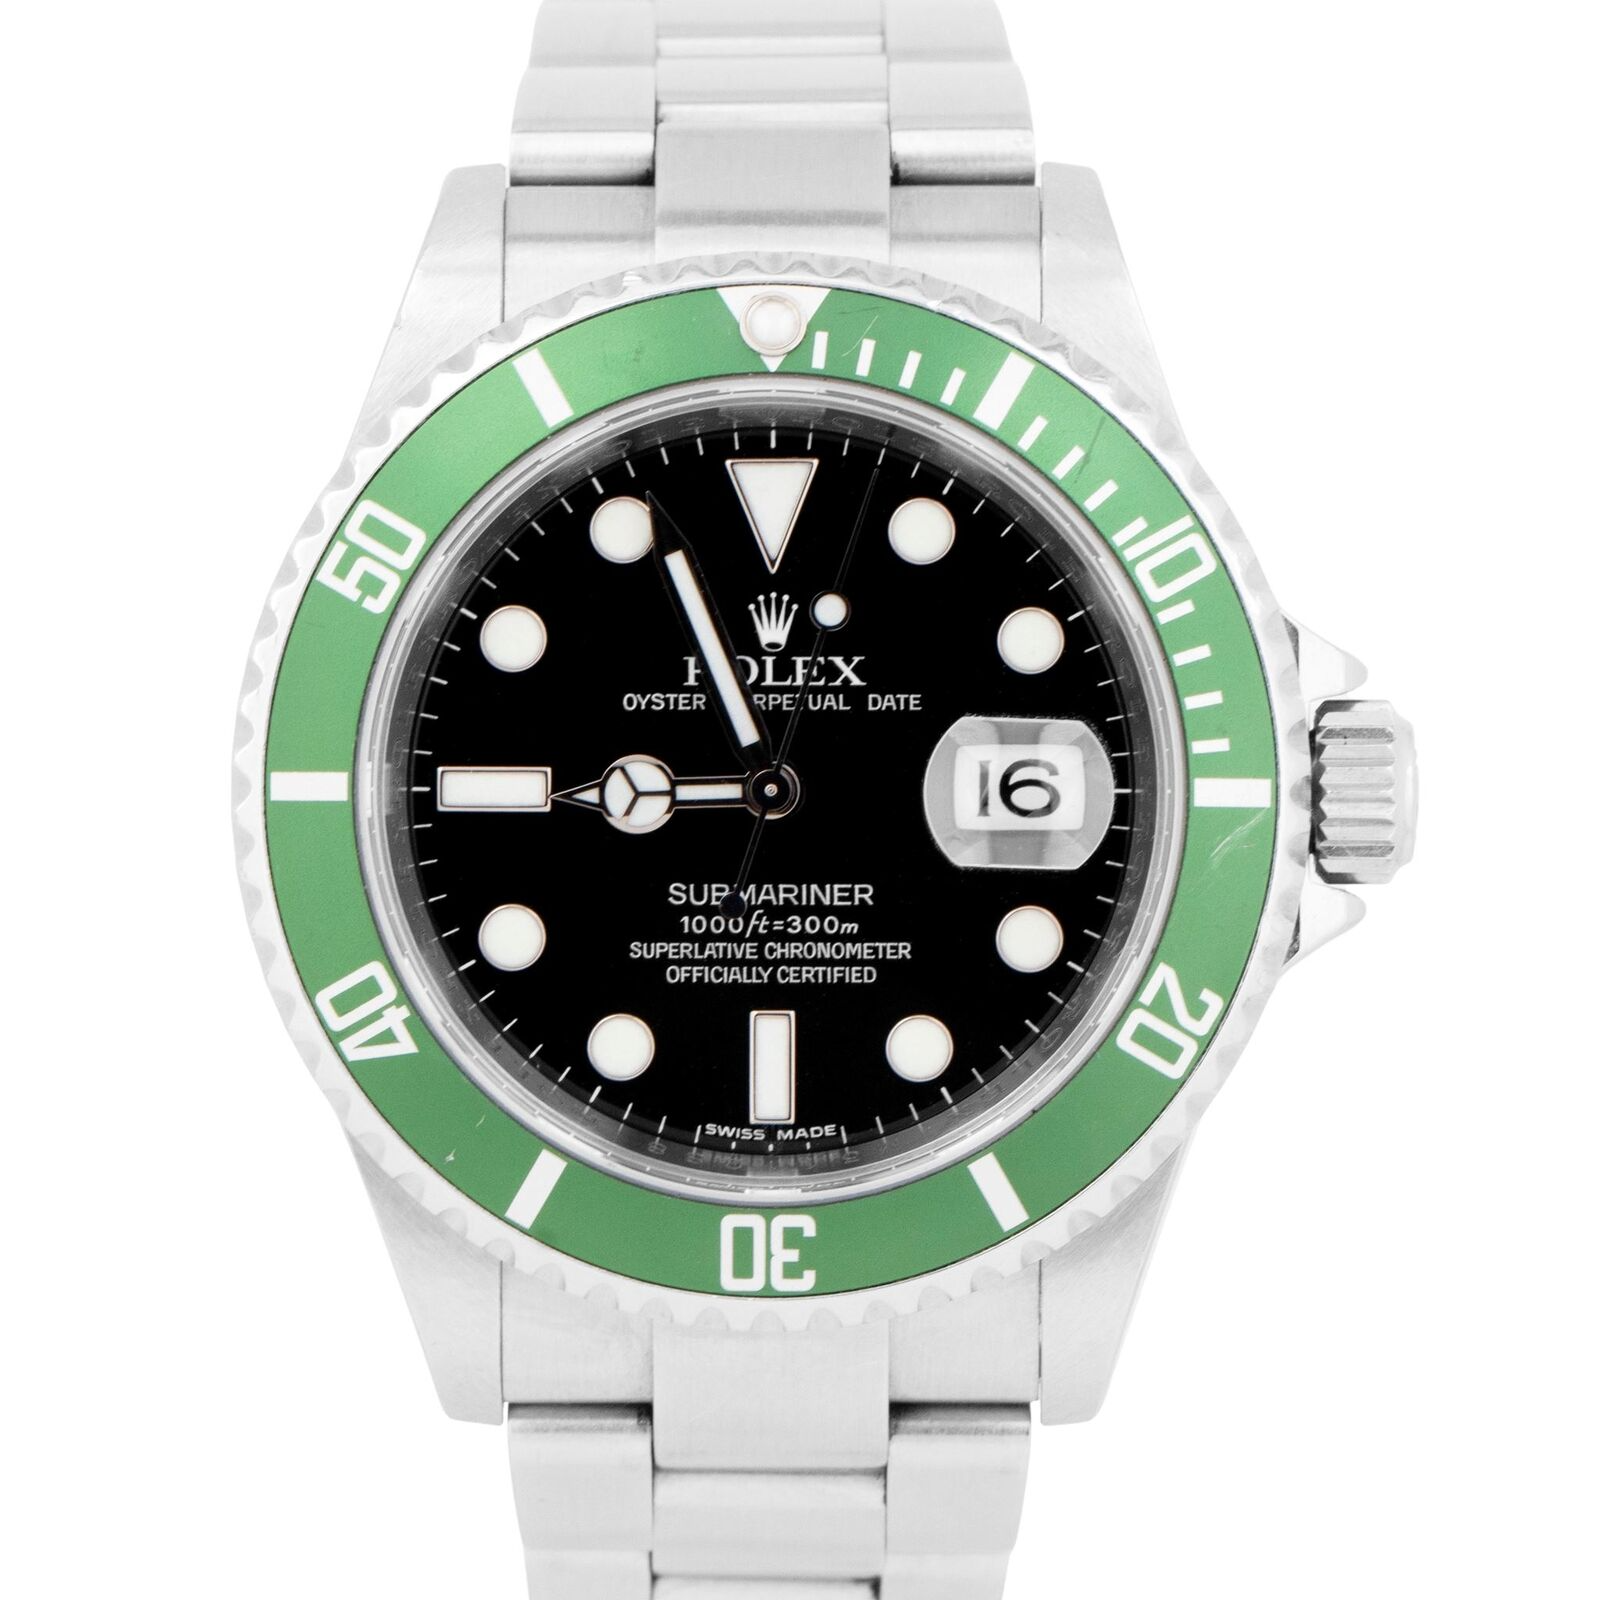 Rolex SUBMARINER – REF 16610 LV – KERMIT – V SERIES – 2009 – for $22,695  for sale from a Trusted Seller on Chrono24